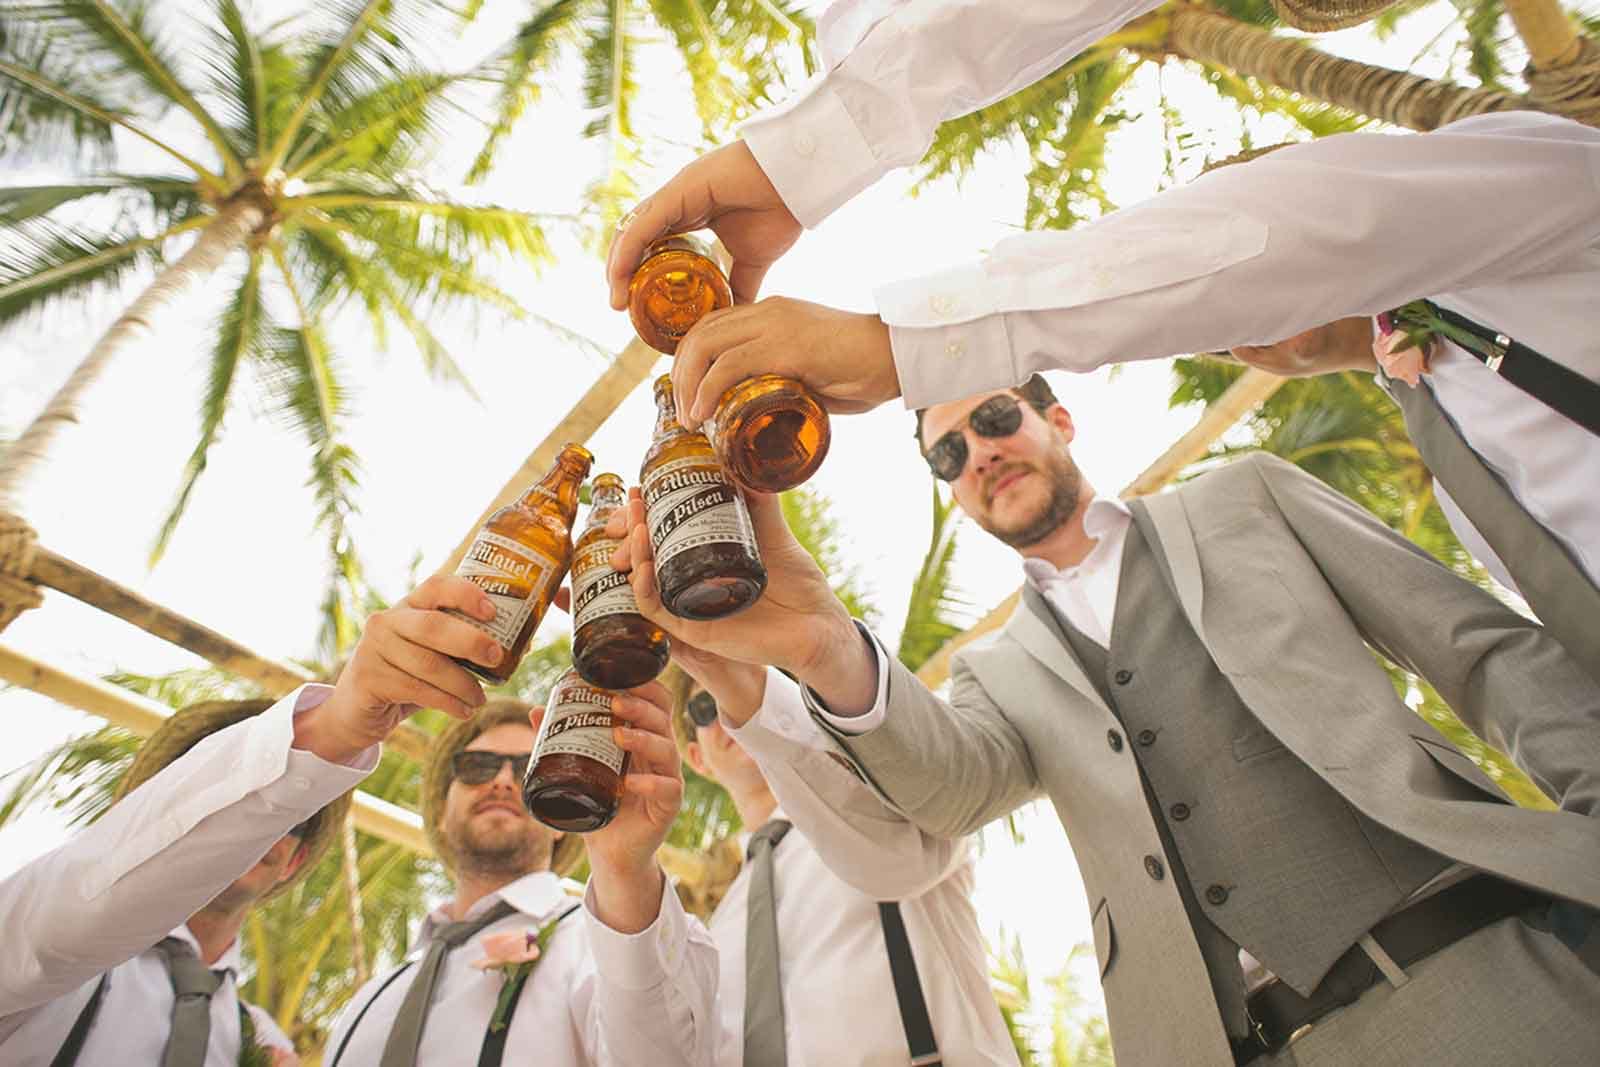 Men in suits toasting beer bottles near palm trees